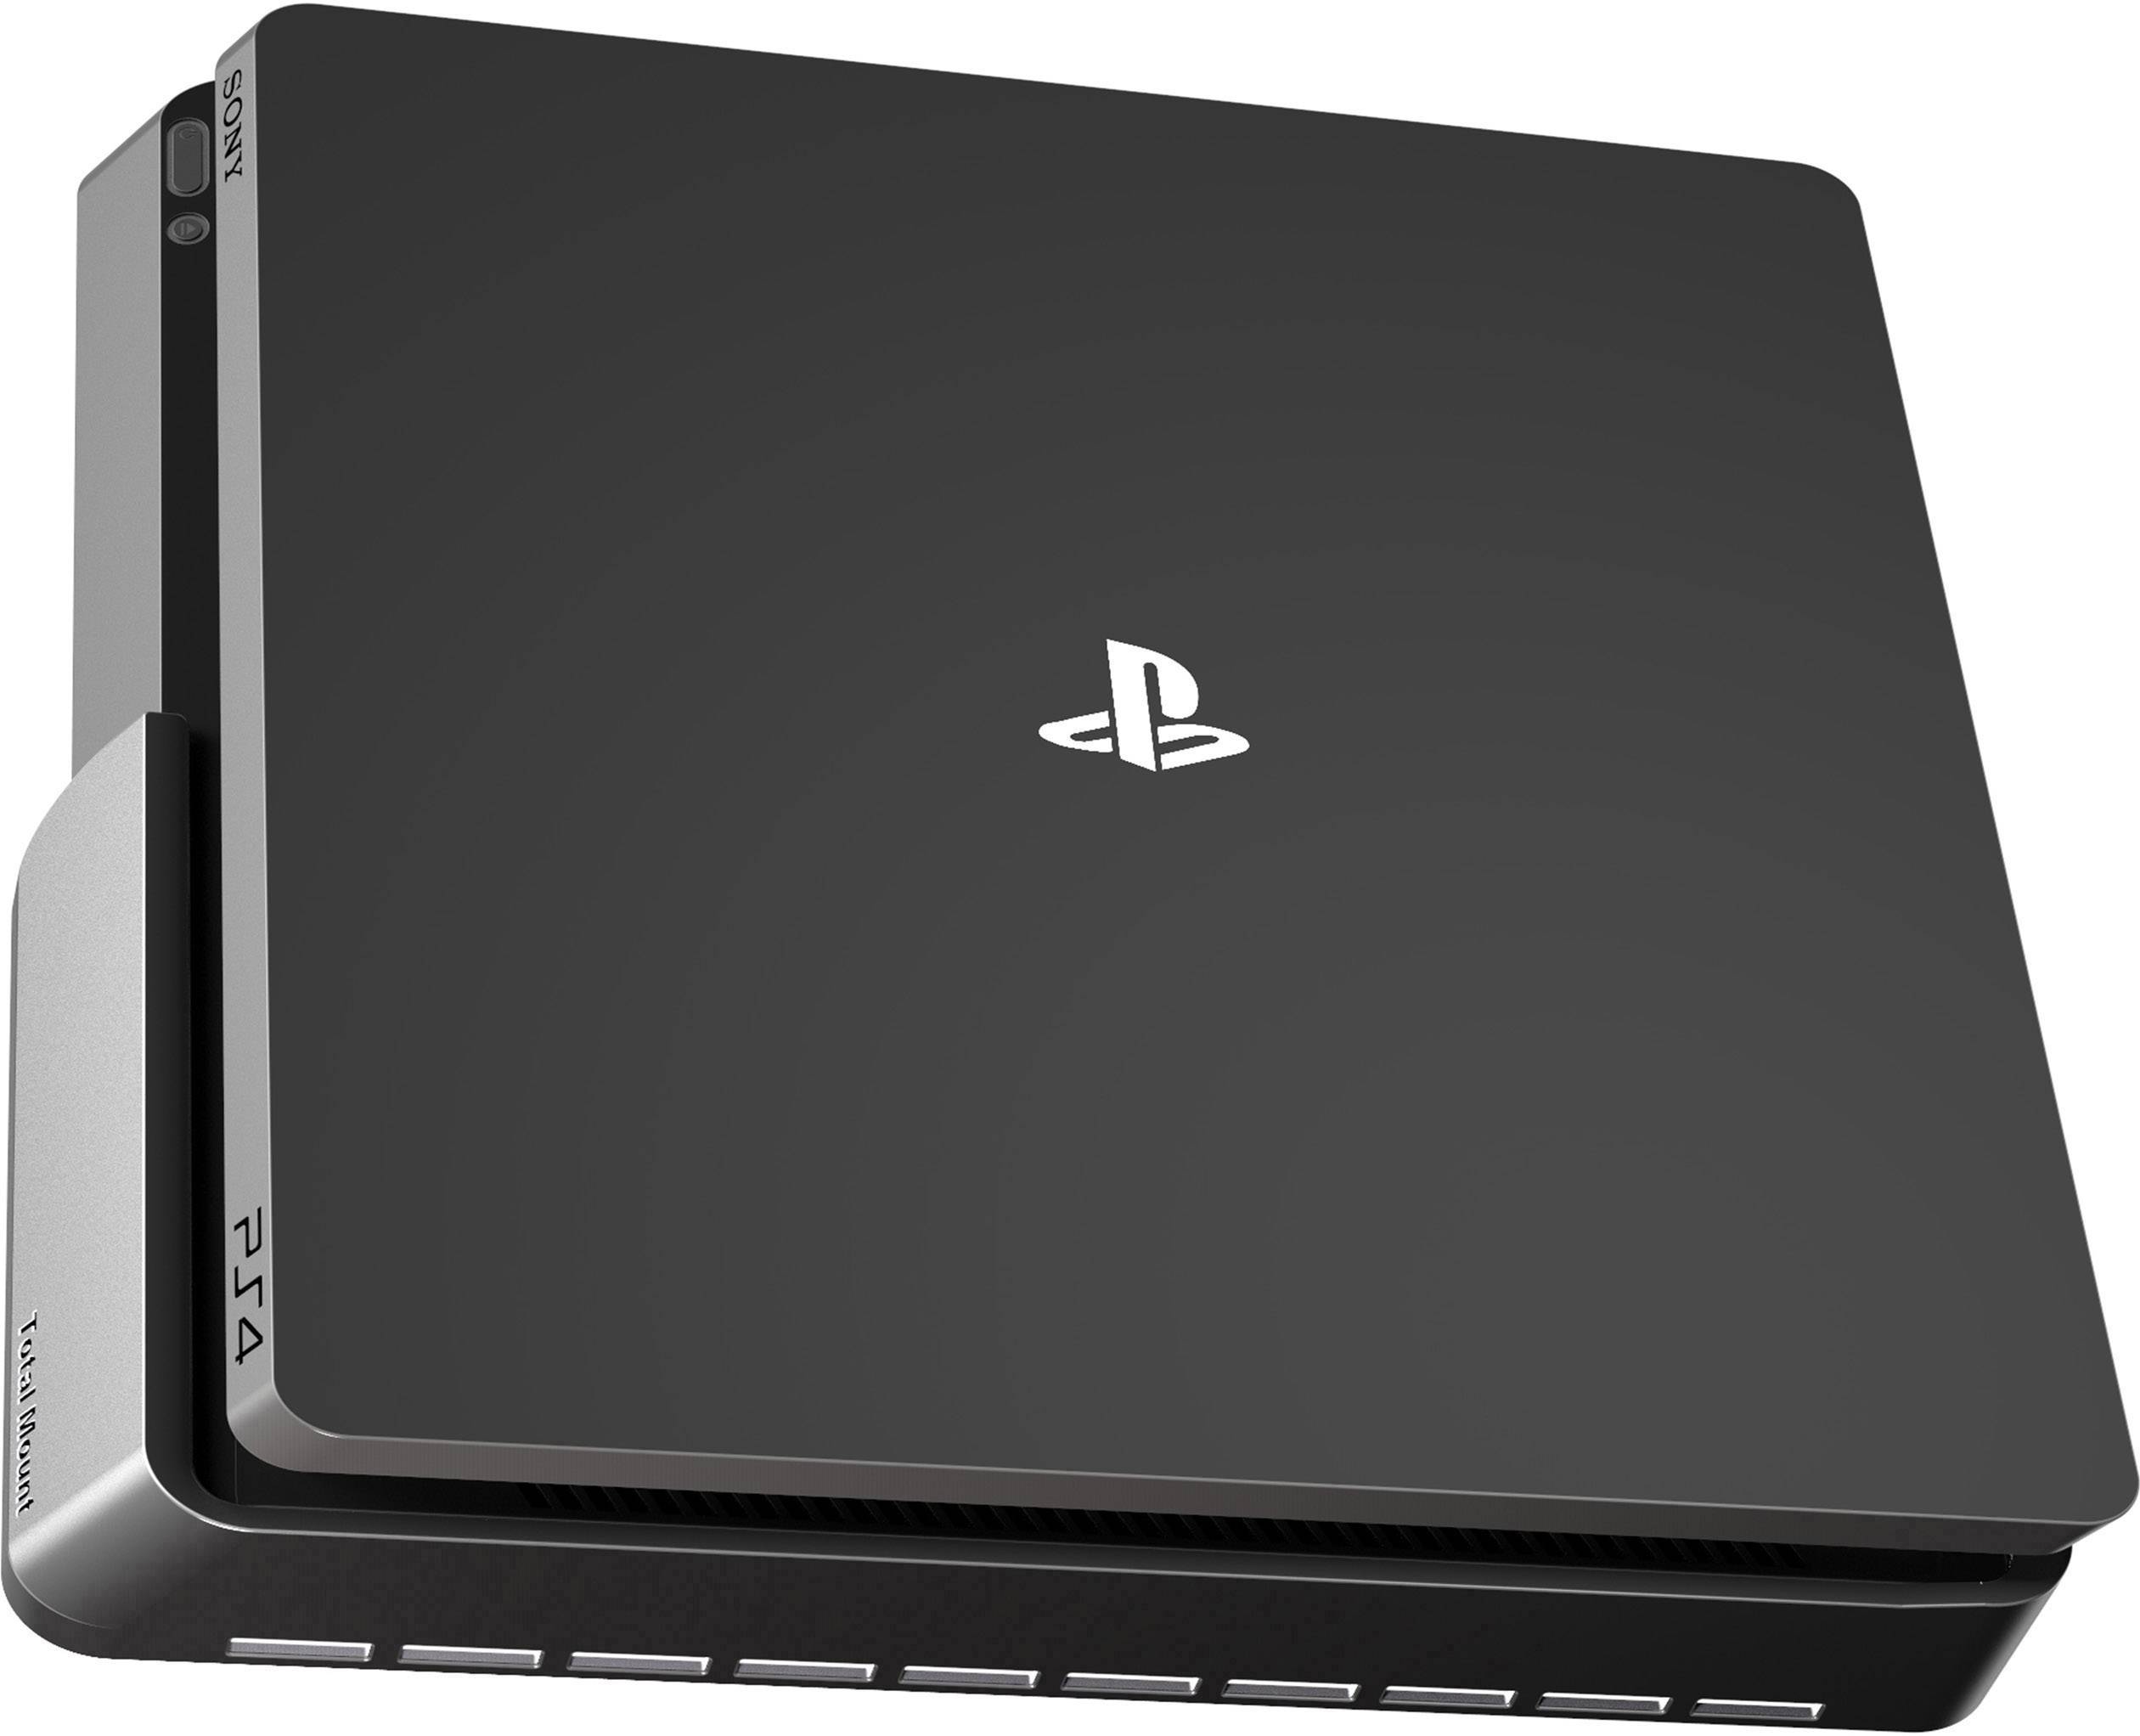 totalmount ps4 pro